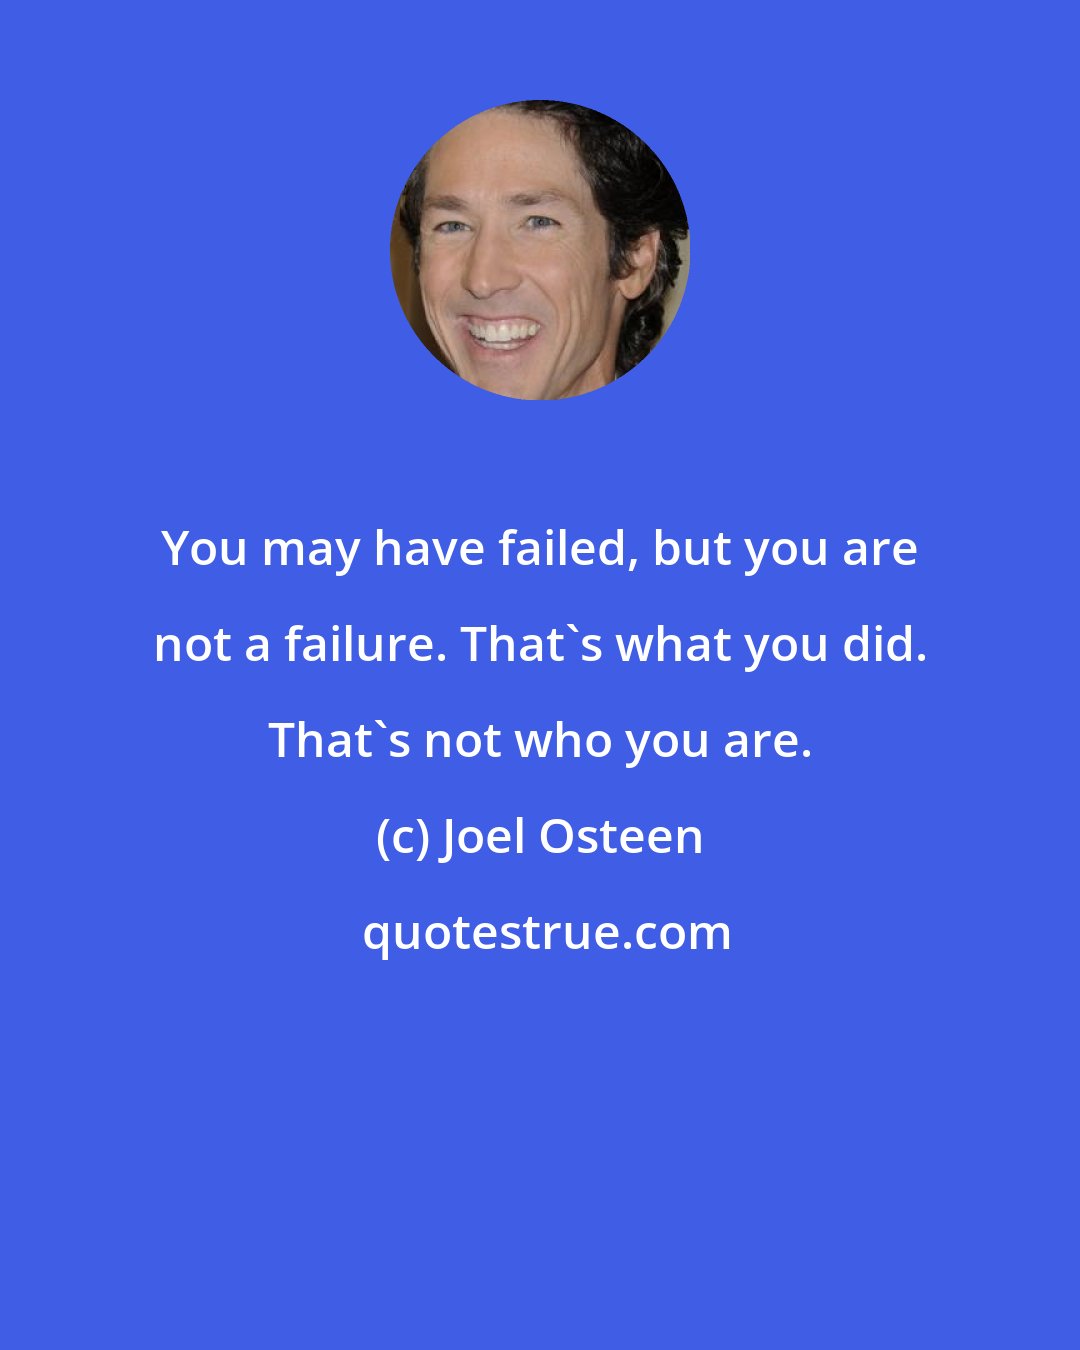 Joel Osteen: You may have failed, but you are not a failure. That's what you did. That's not who you are.